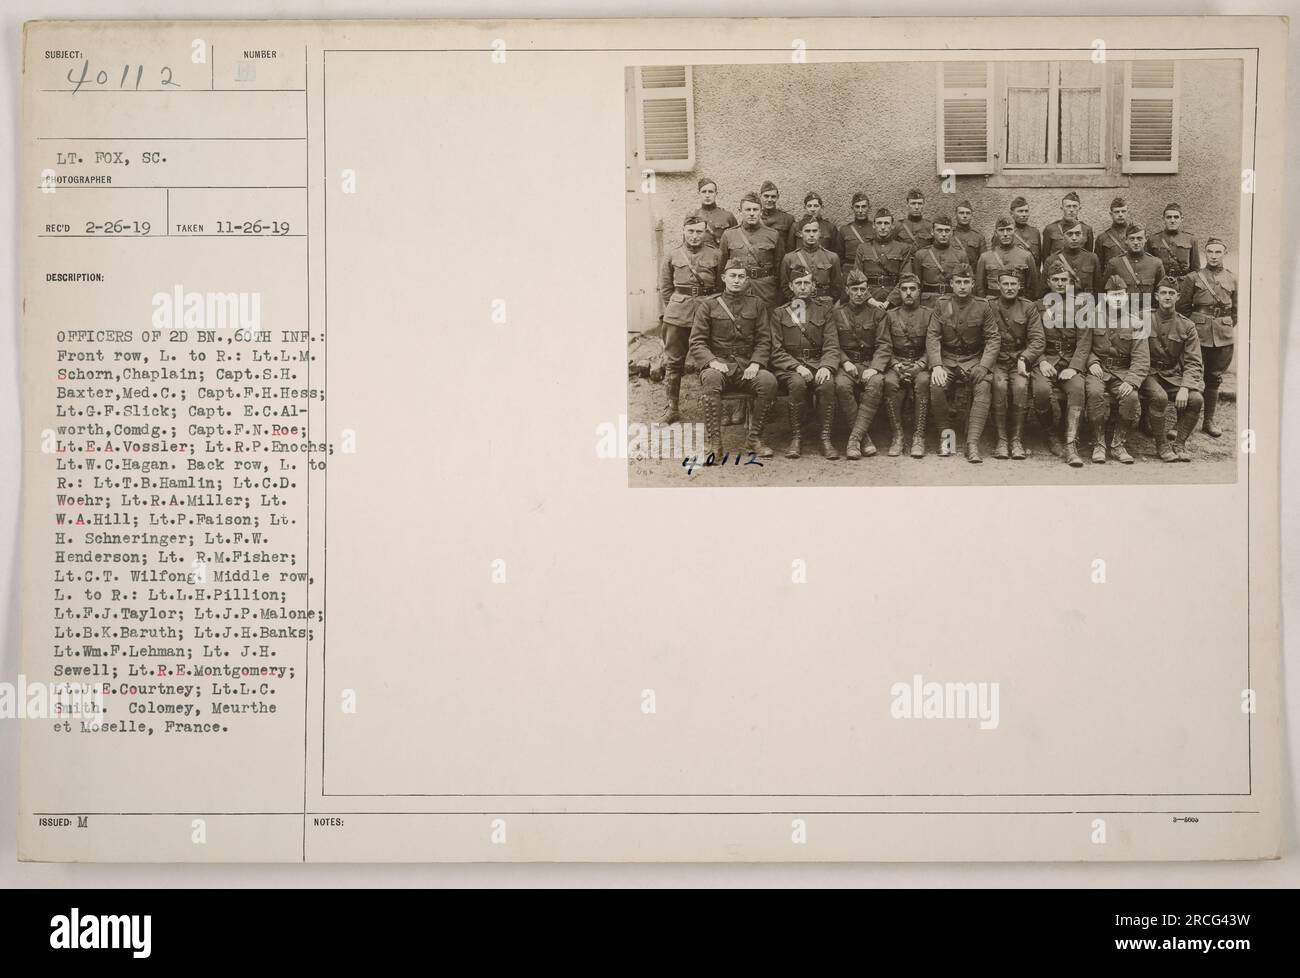 This is an image of the officers of the 2nd Battalion, 60th Infantry regiment during World War I. In the front row, from left to right, are Lt. L.M. Schorn (Chaplain), Capt. S.H. Baxter (Med.C.), Capt. F.H. Hess, Lt. Q.F. Slick, Capt. E.C. Alworth (Commanding), Capt. F.N. Roe, Lt. E.A. Vossler, Lt. R.P. Enochs, and Lt. W.C. Hagan. In the middle row, from left to right, are Lt. L.H. Pillion, Lt. F.J. Taylor, Lt. J.P. Malone, Lt. B.K. Baruth, Lt. J.H. Banks, Lt. Wm.F. Lehman, Lt. J.H. Sewell, Lt. R.E. Montgomery, Lt. J.E. Courtney, and Lt. L.C. Smith. And in the back row, from left to right, are Stock Photo